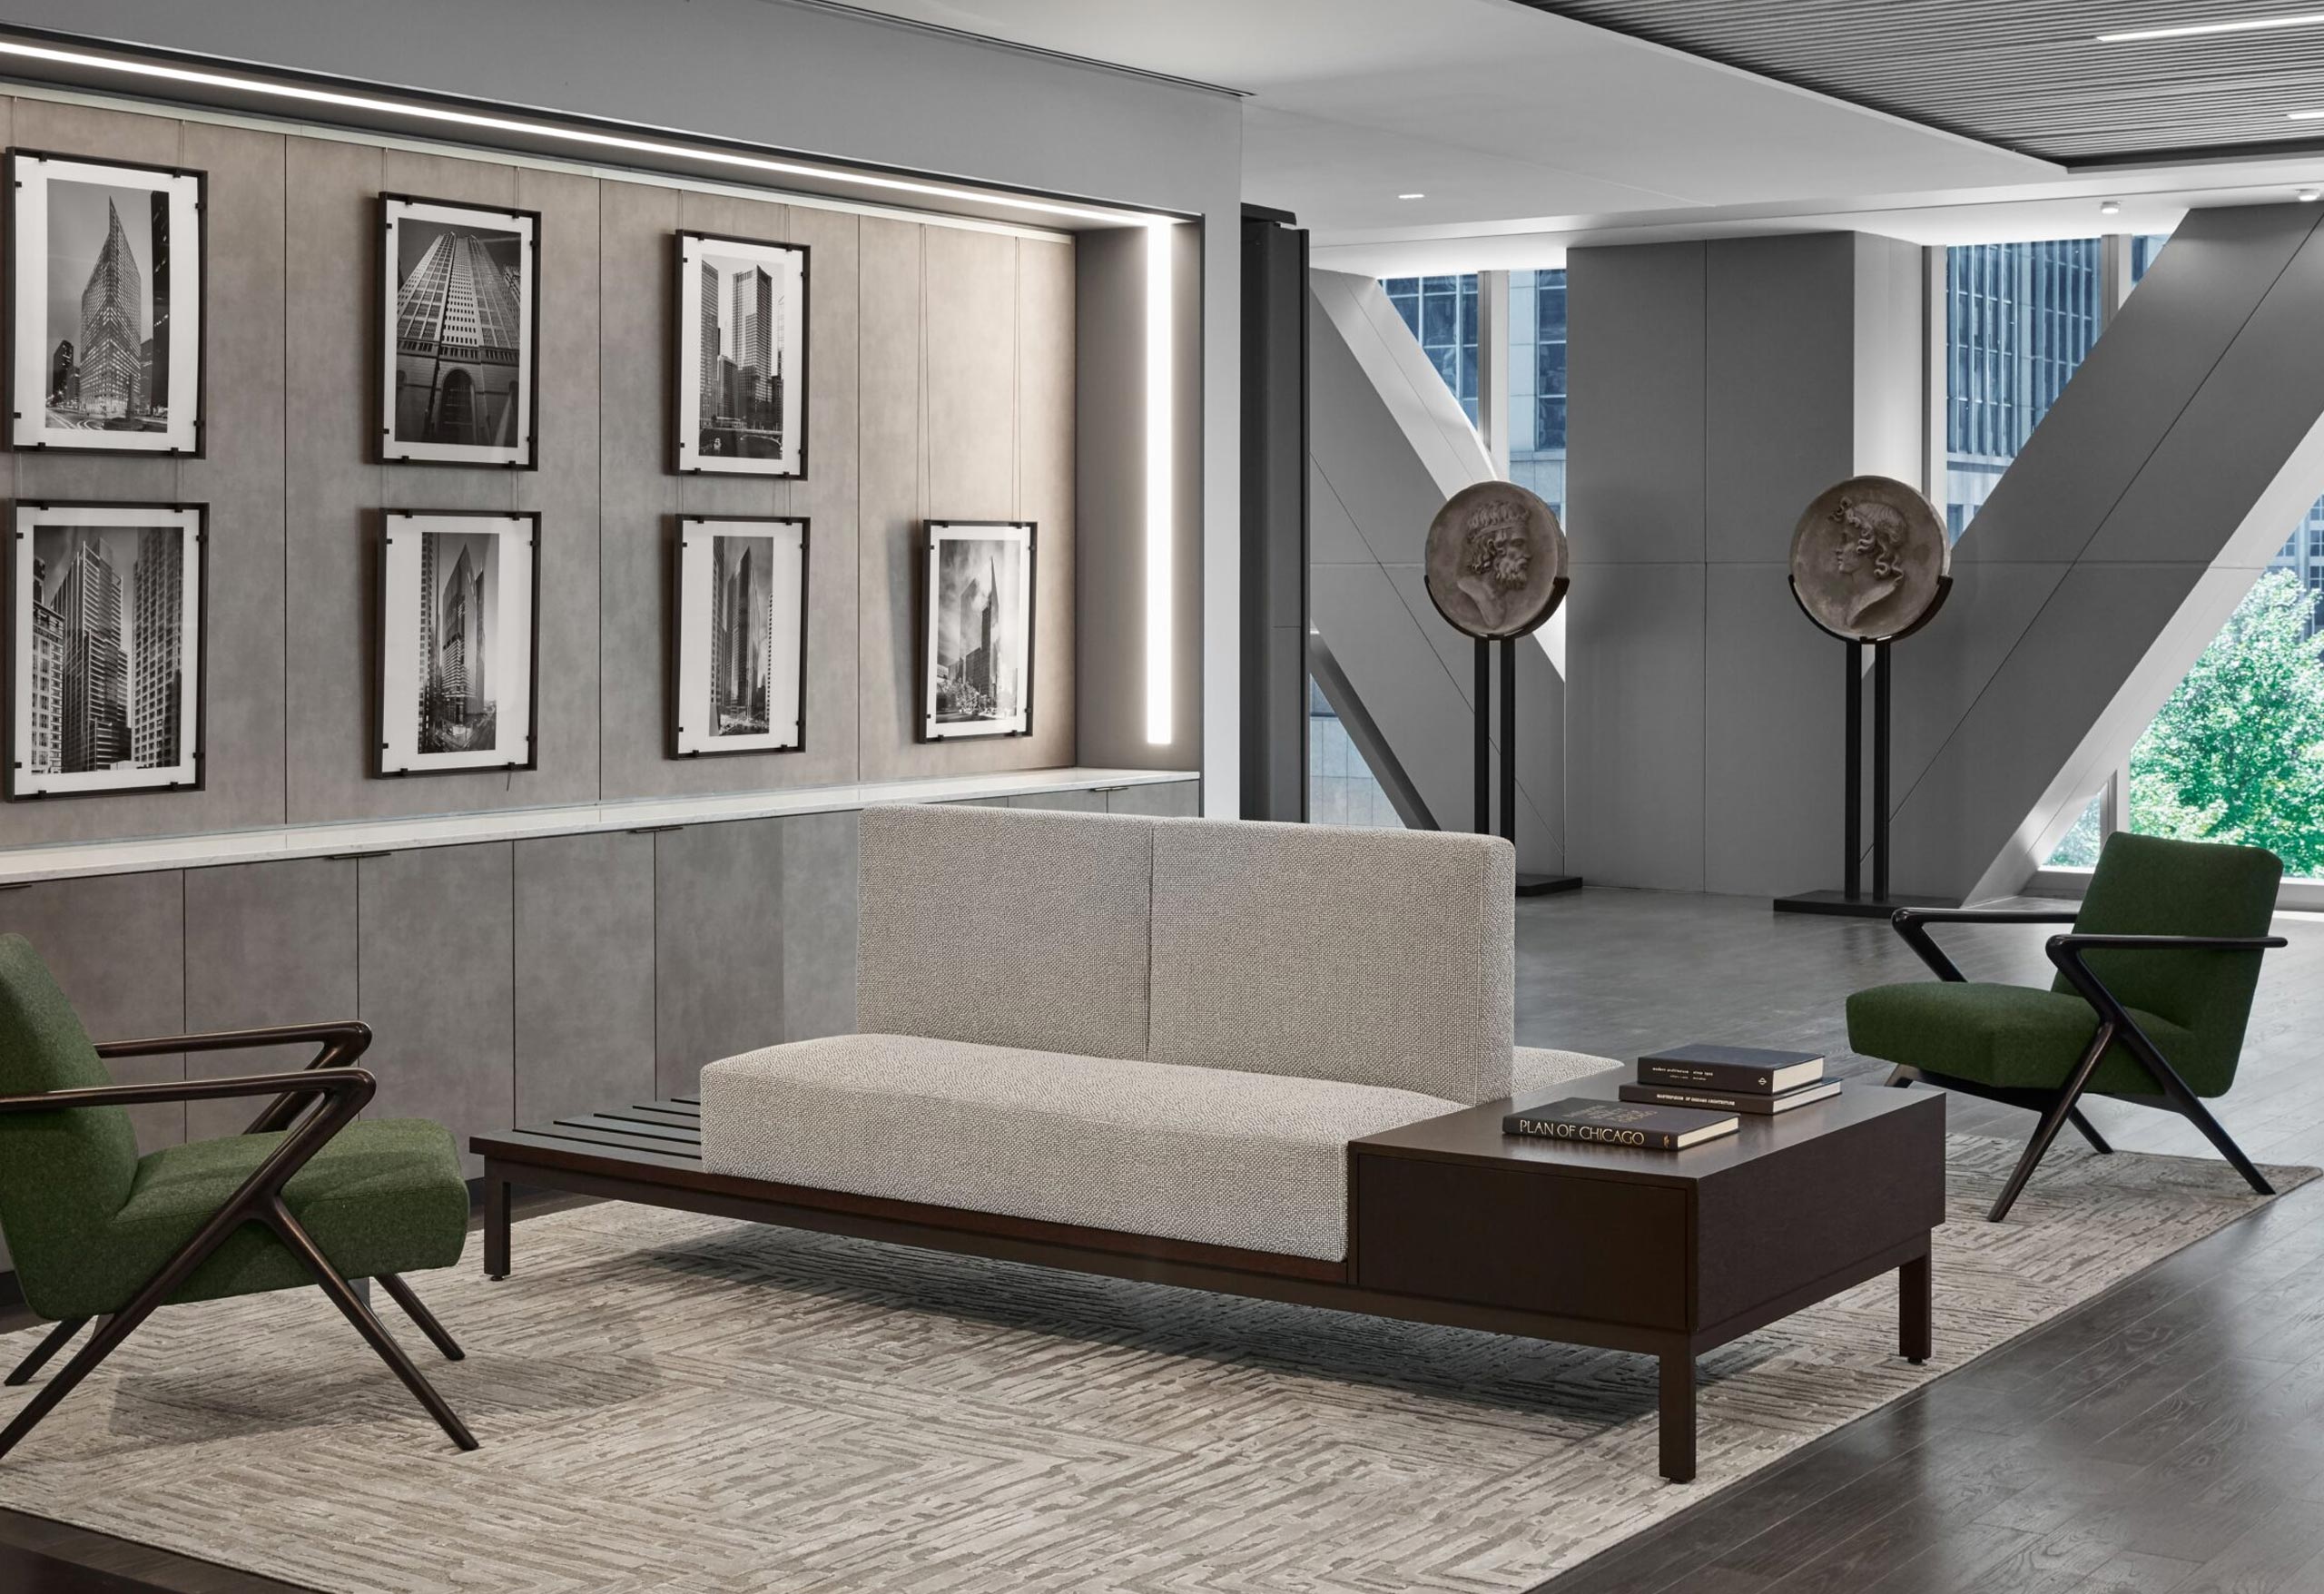 Spacious lobby incorporating SHIIR Rugs, Holly Hunt Lounge Chairs, Monochromatic Art, and Byzantine mosaics.